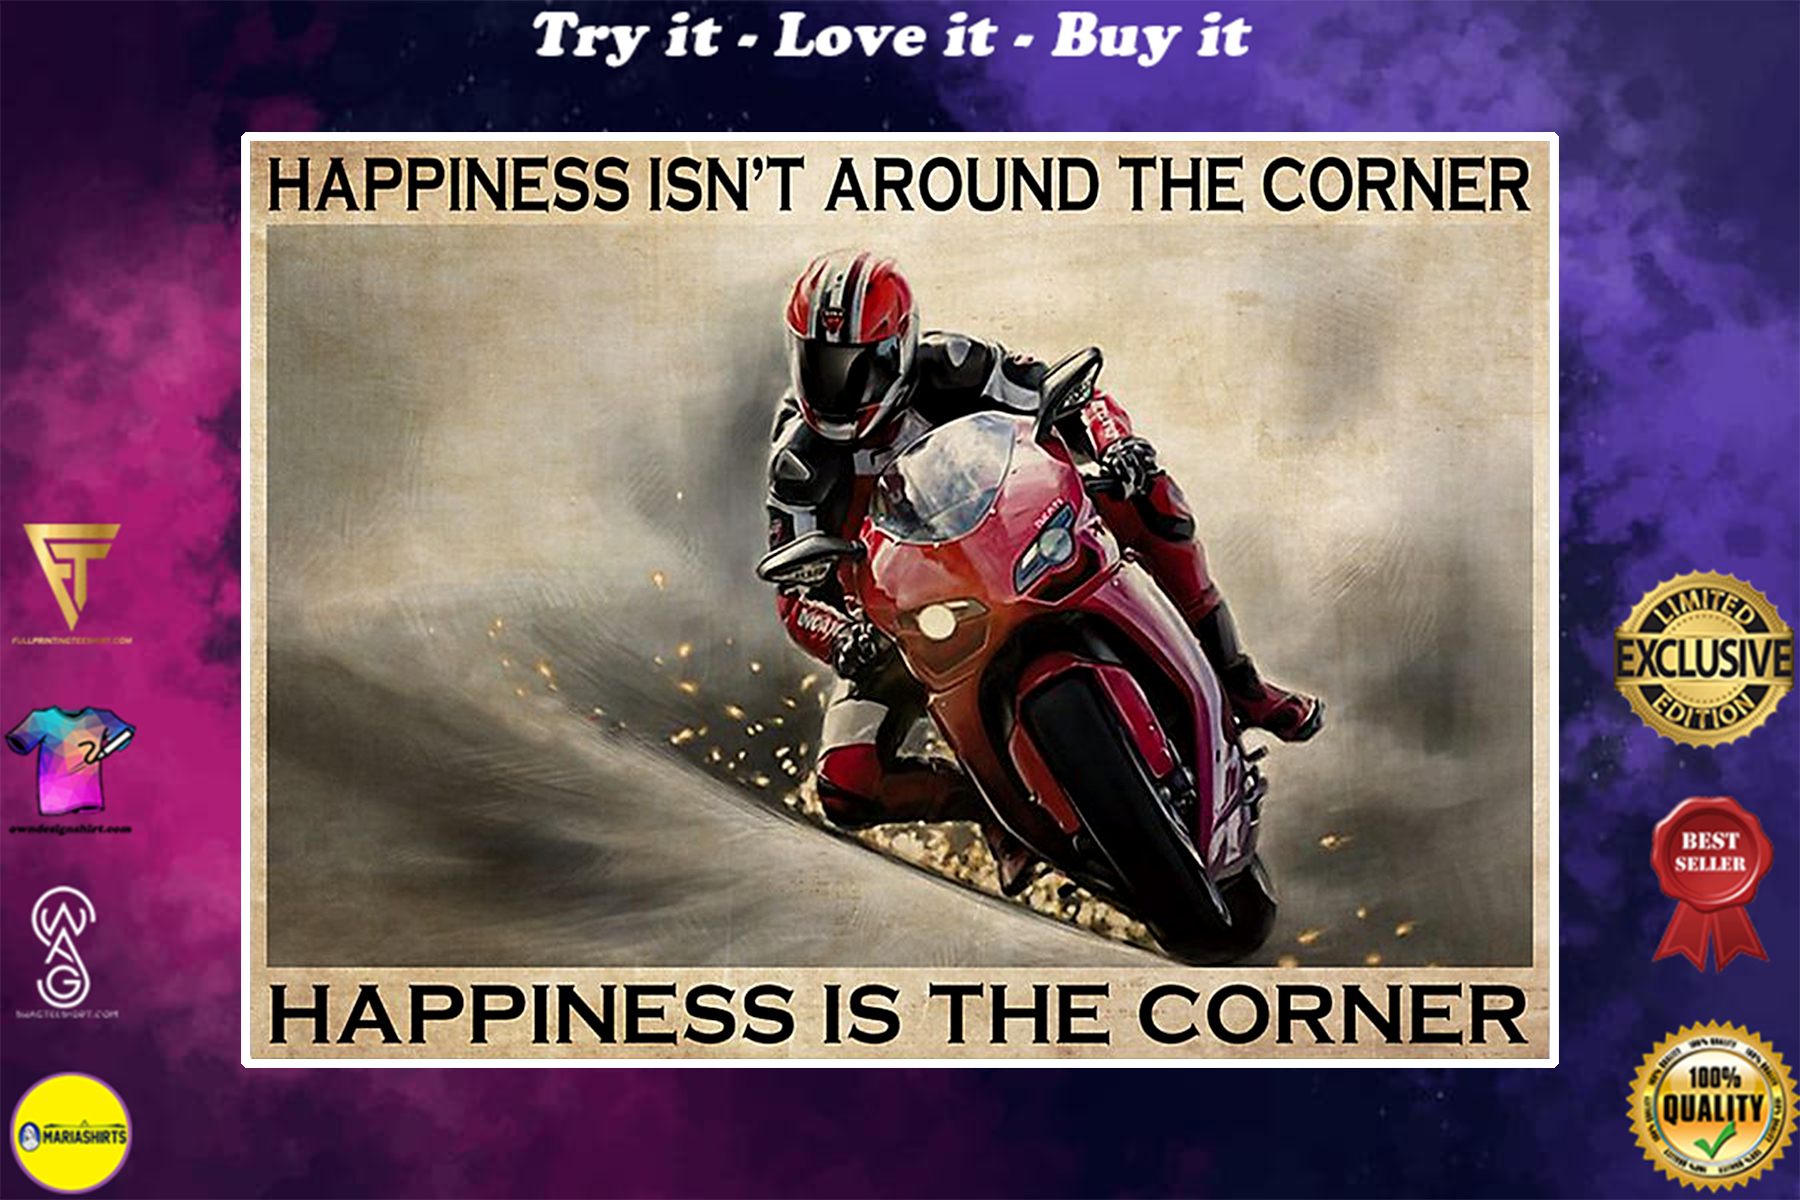 vintage motor racing happiness isnt around the corner happiness is the corner poster